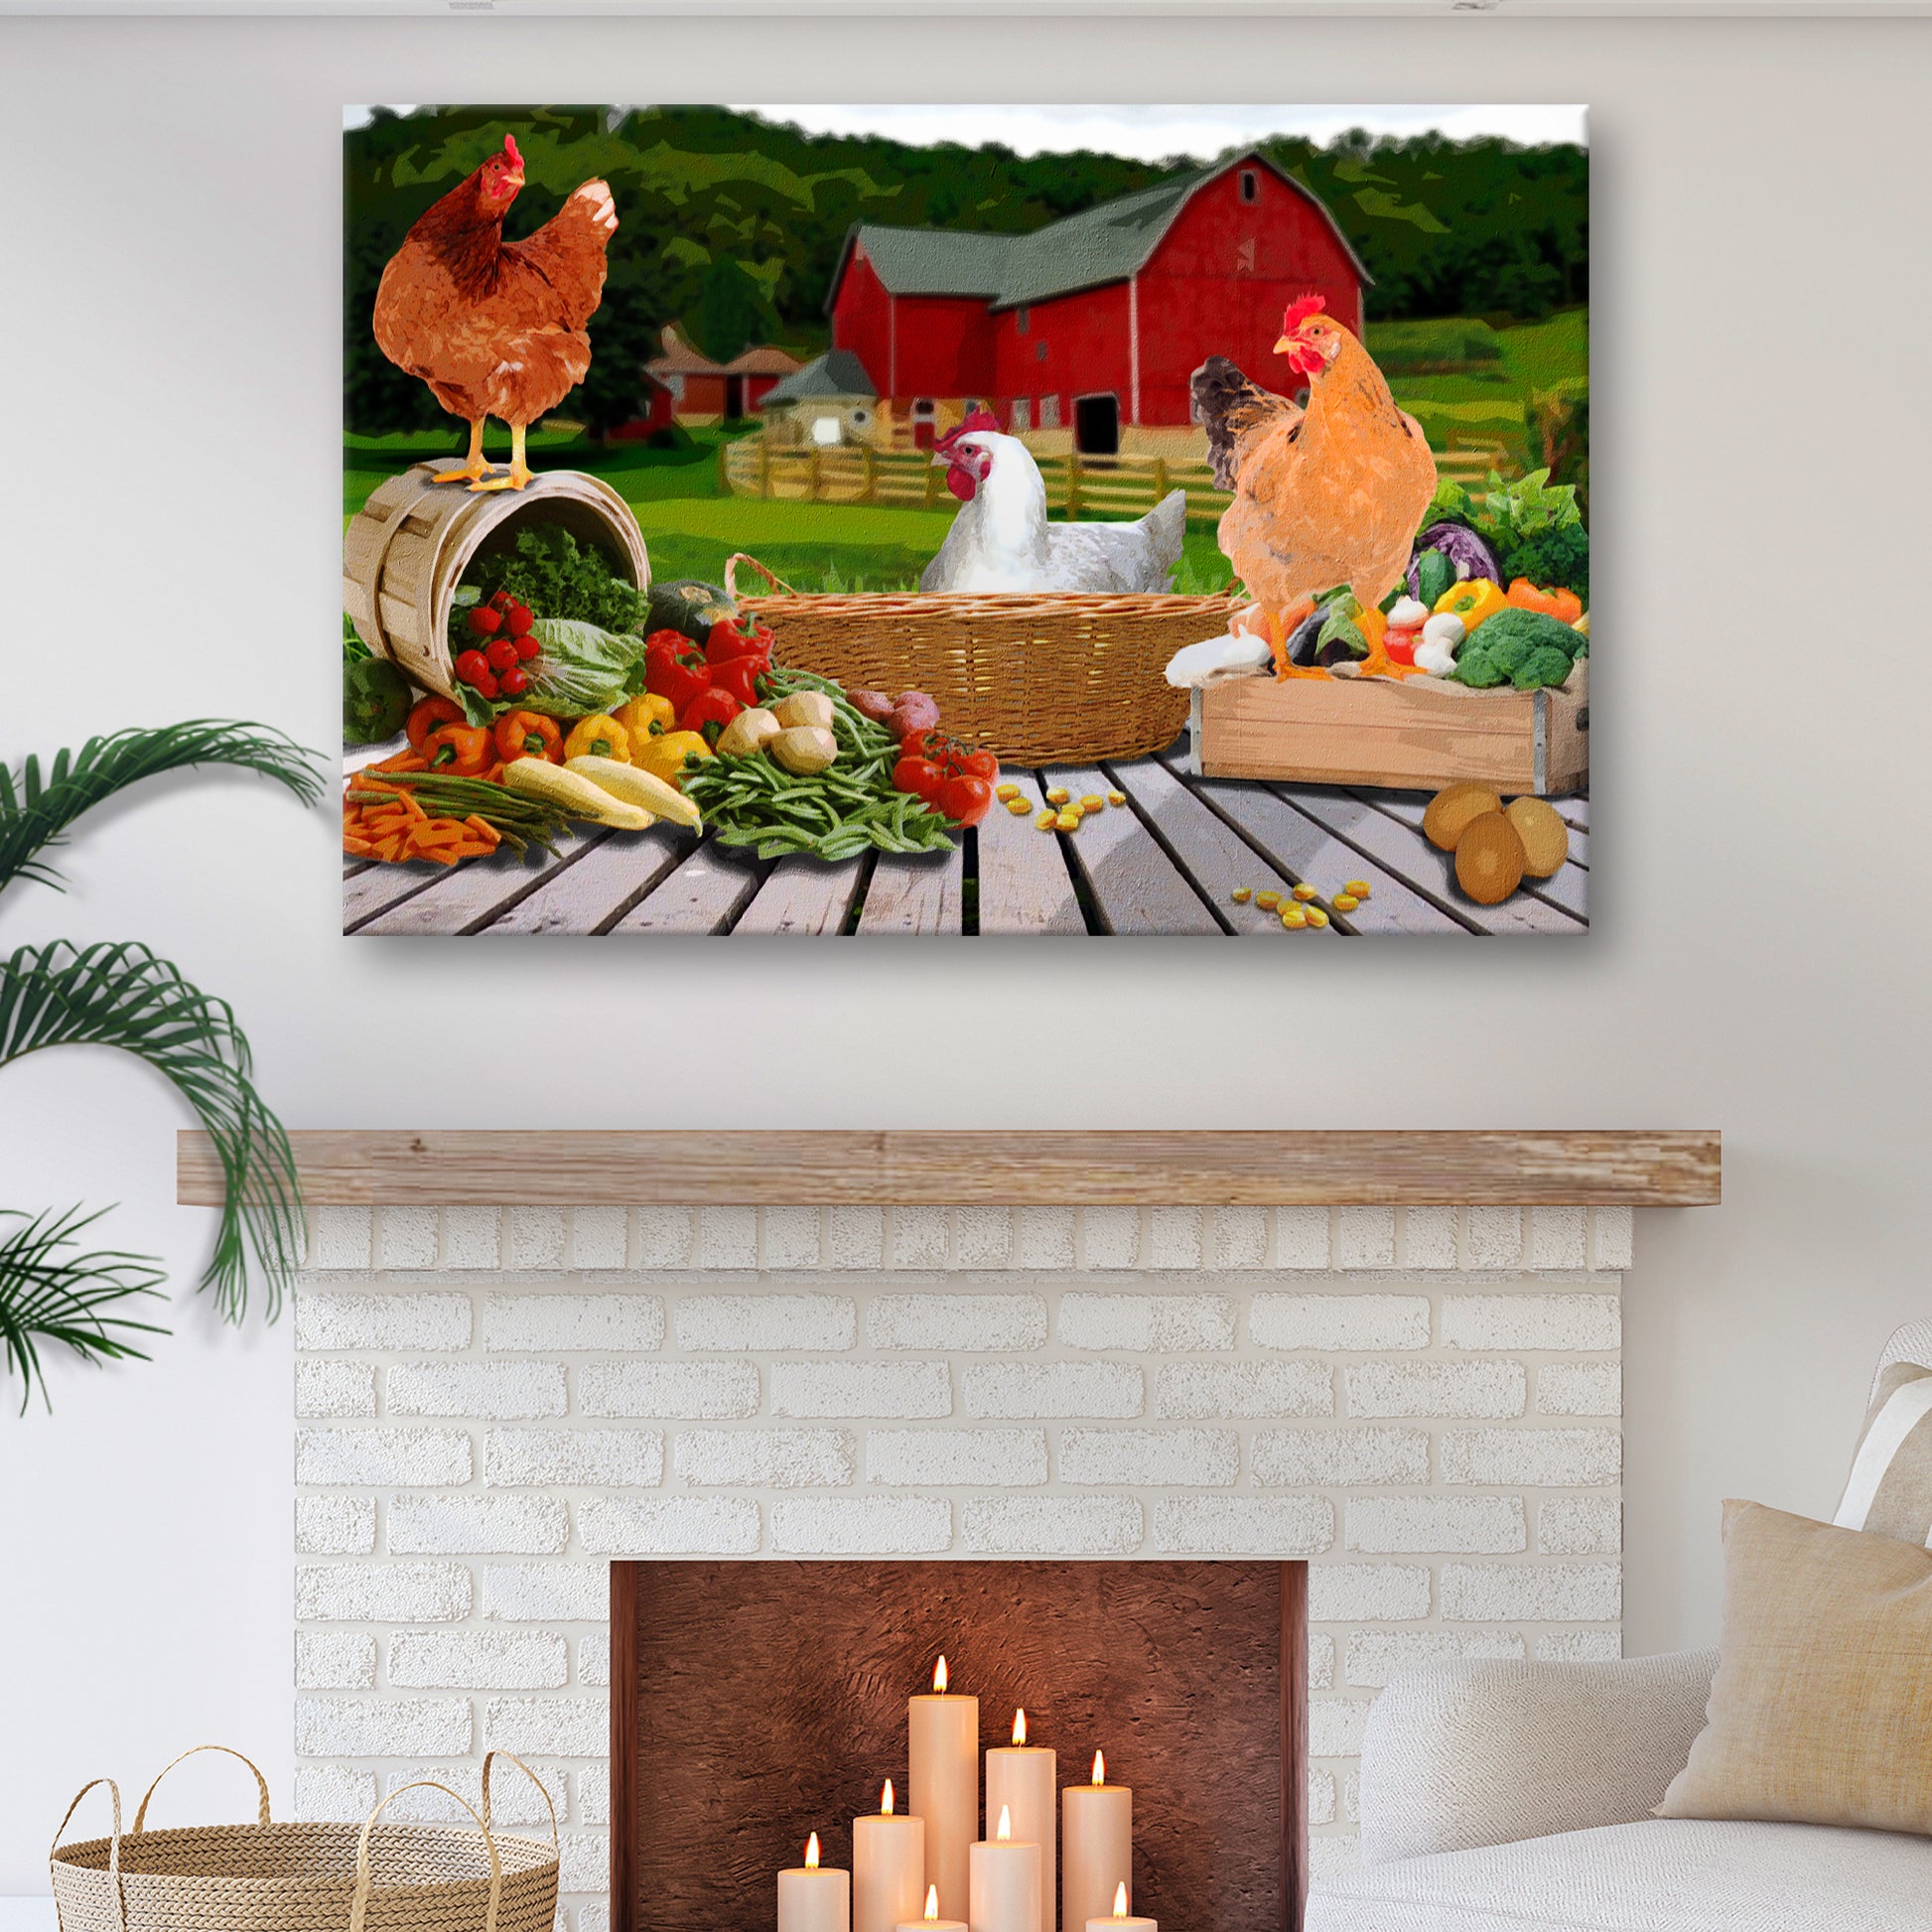 Chicken Farm And Veggies Canvas Wall Art - Image by Tailored Canvases